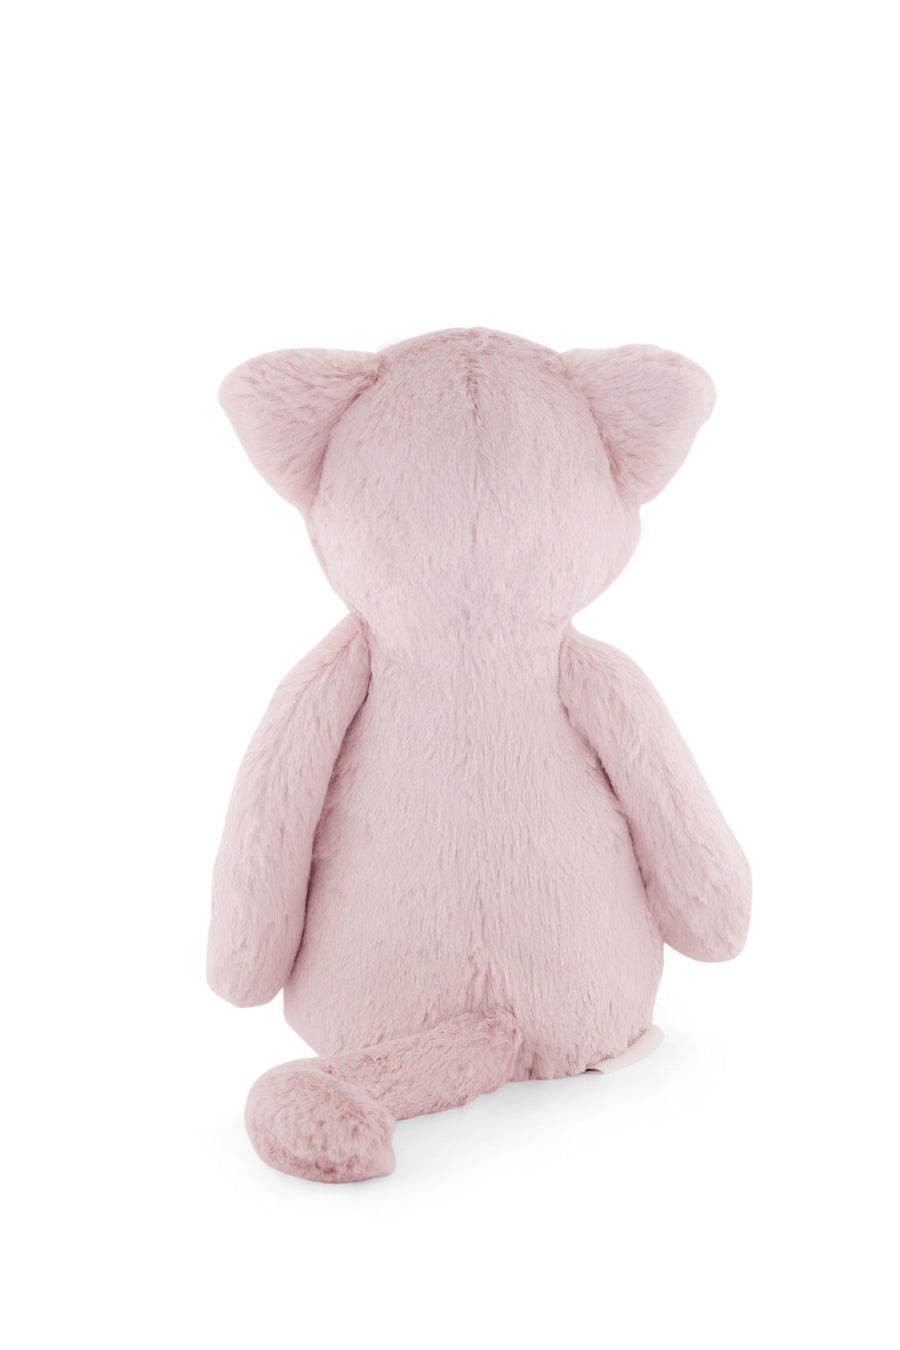 Snuggle Bunnies - Elsie the Kitty - Blossom Childrens Toy from Jamie Kay NZ